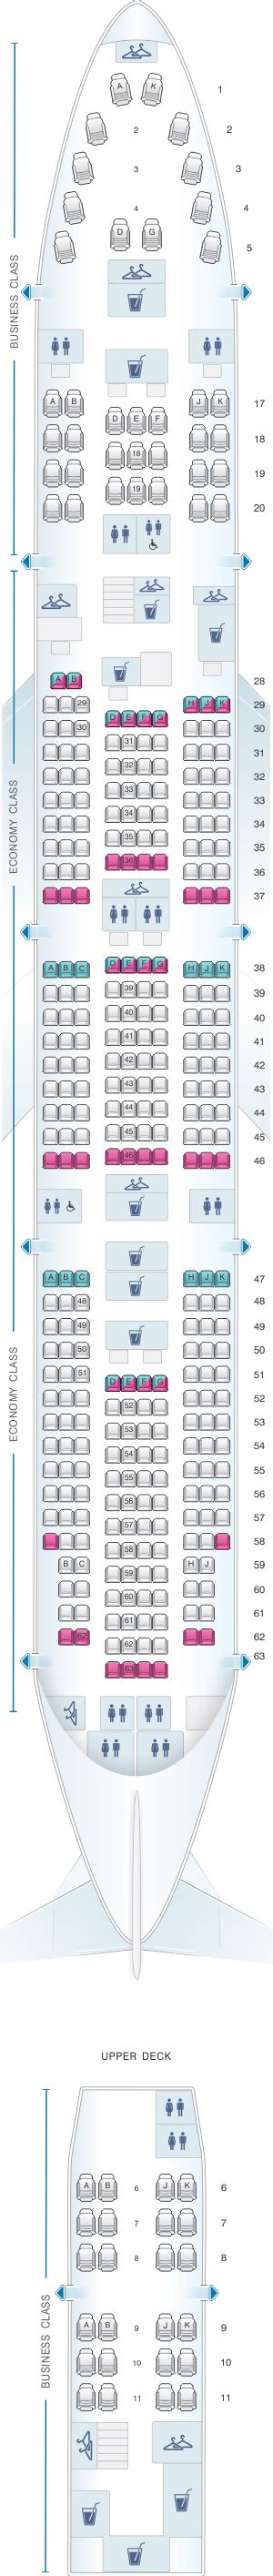 Seat Map China Airlines Boeing B Pax Seatmaestro